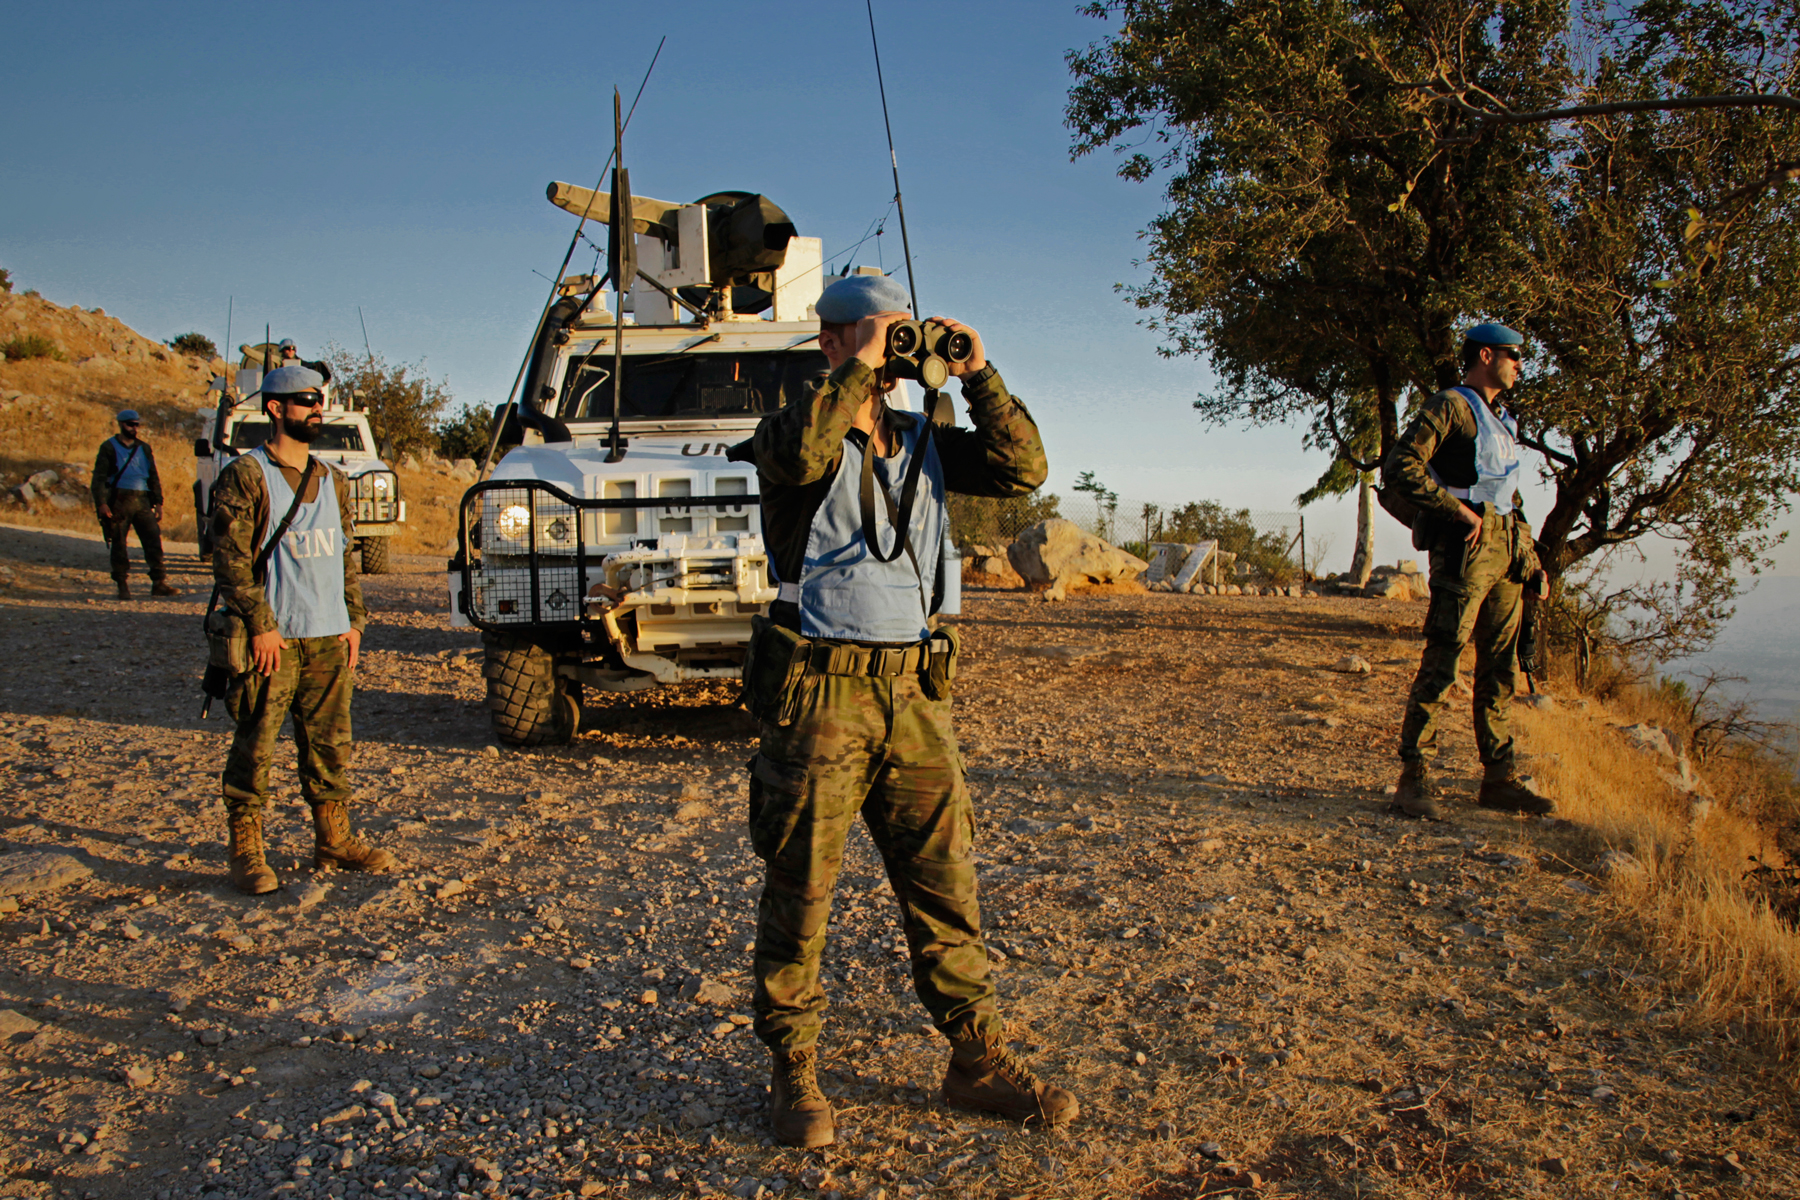 Spanish troops belonging to UNIFIL